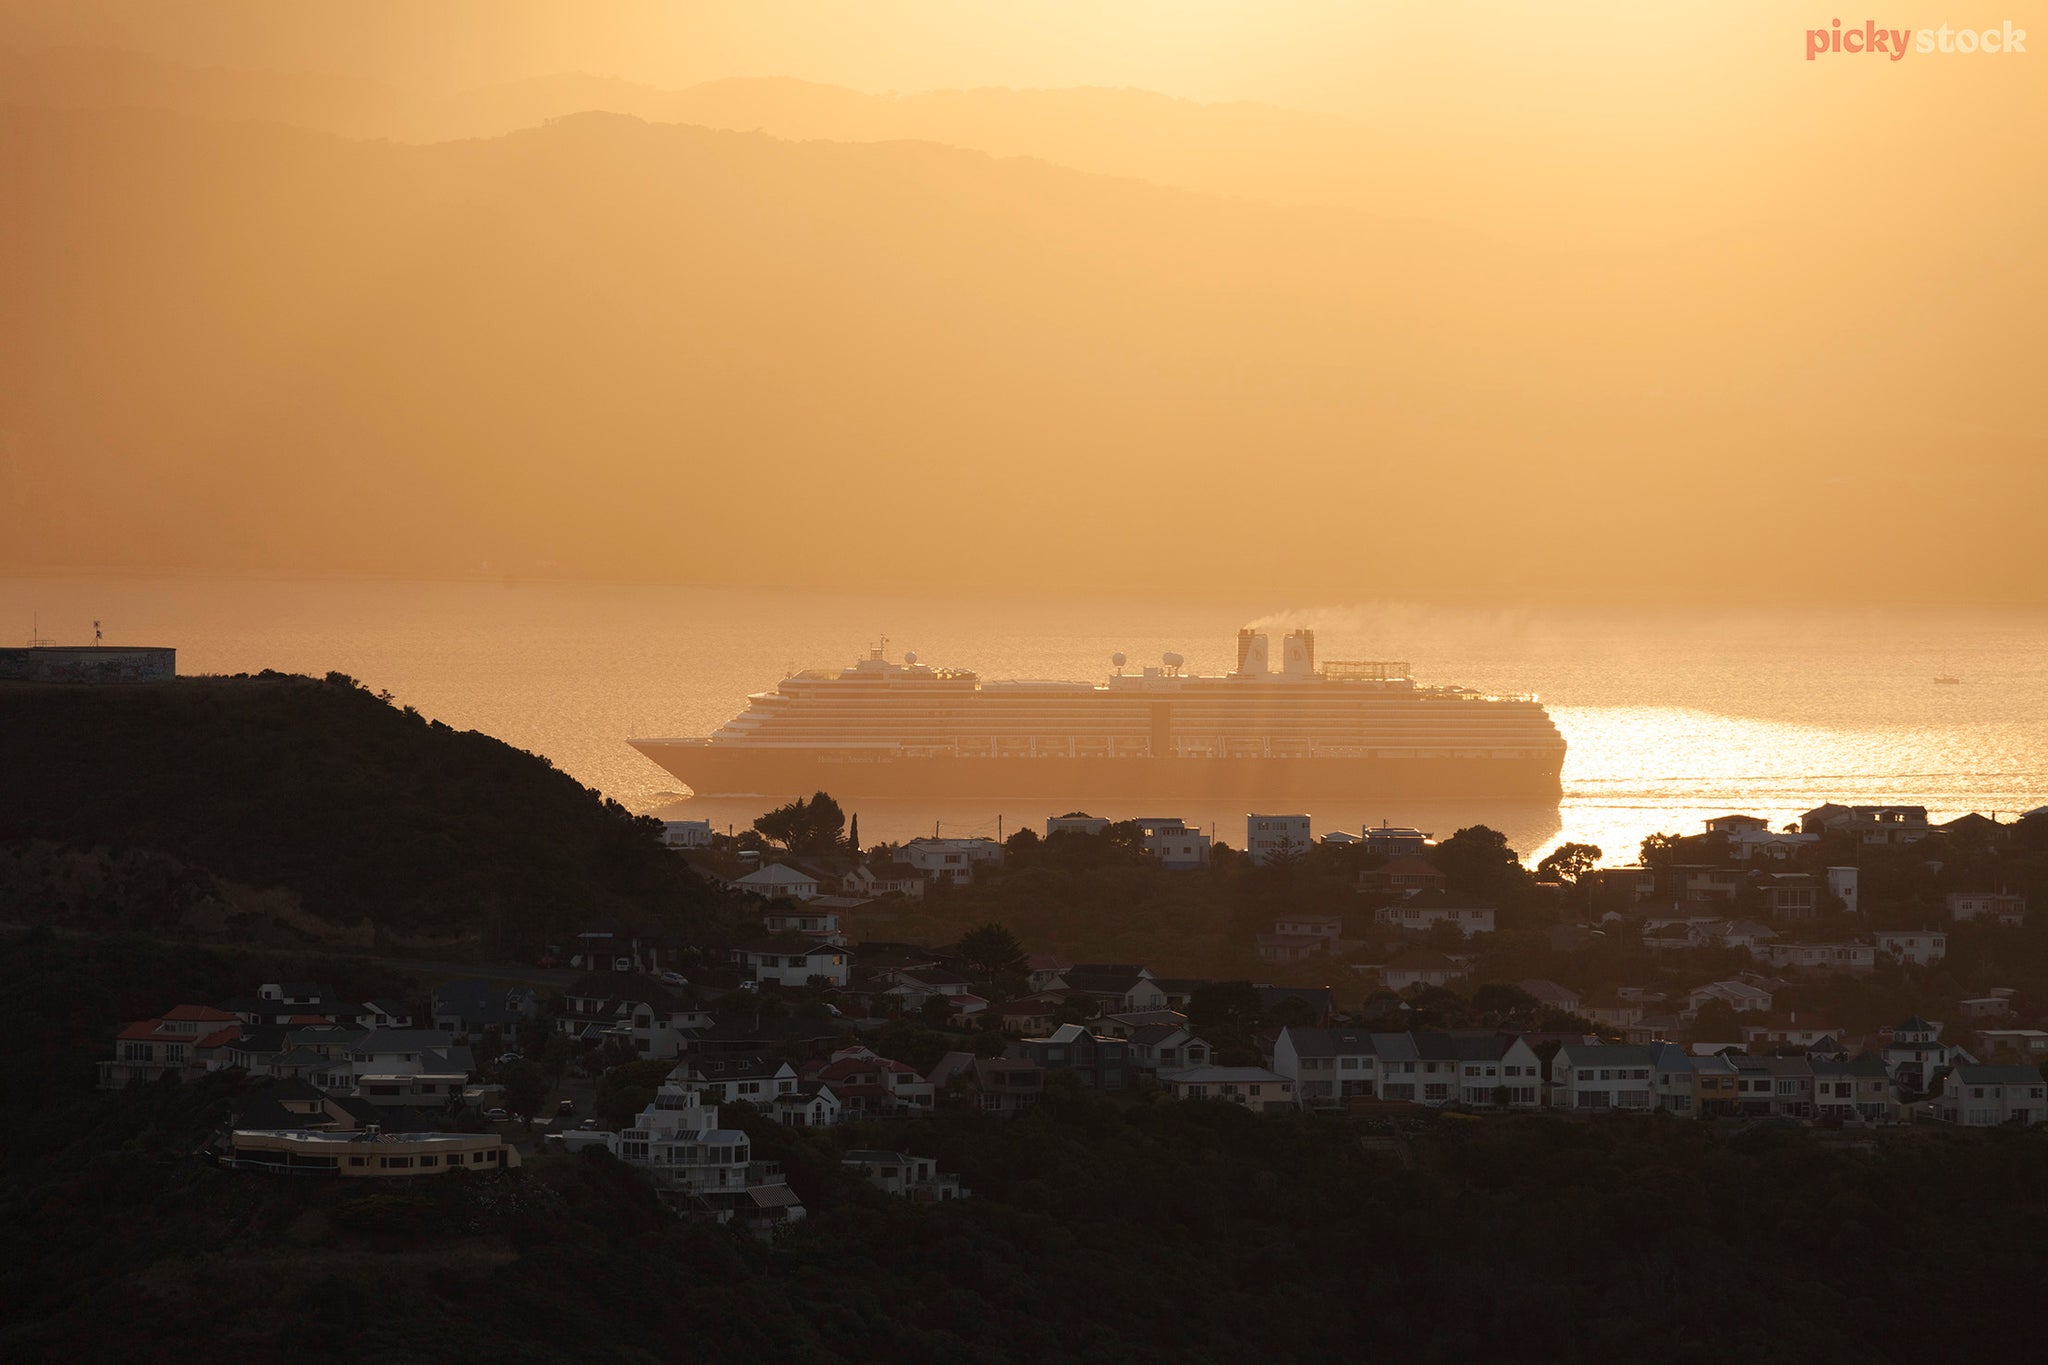 Cruise ship entering Wellington Harbour at sunrise. Foreground shows the hills of Wellington with various homes scattered throughout. 
